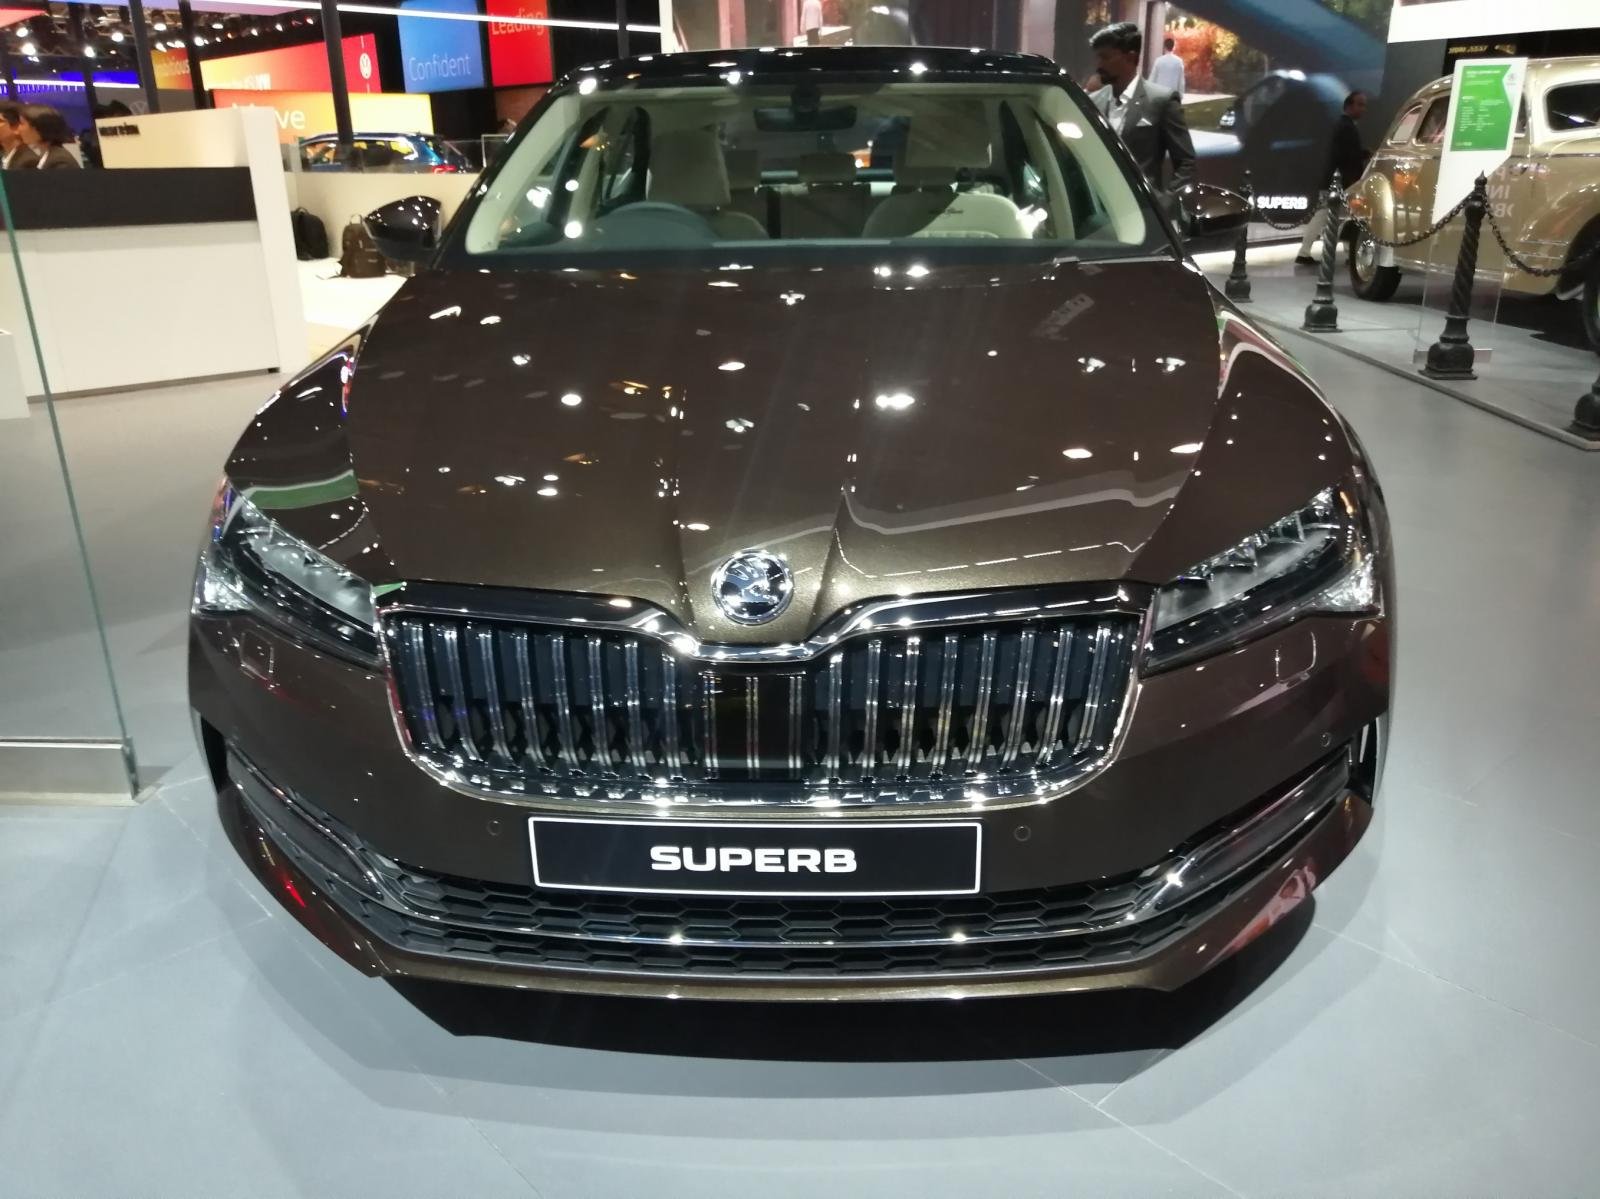 Skoda Superb launched at Auto Expo 2020